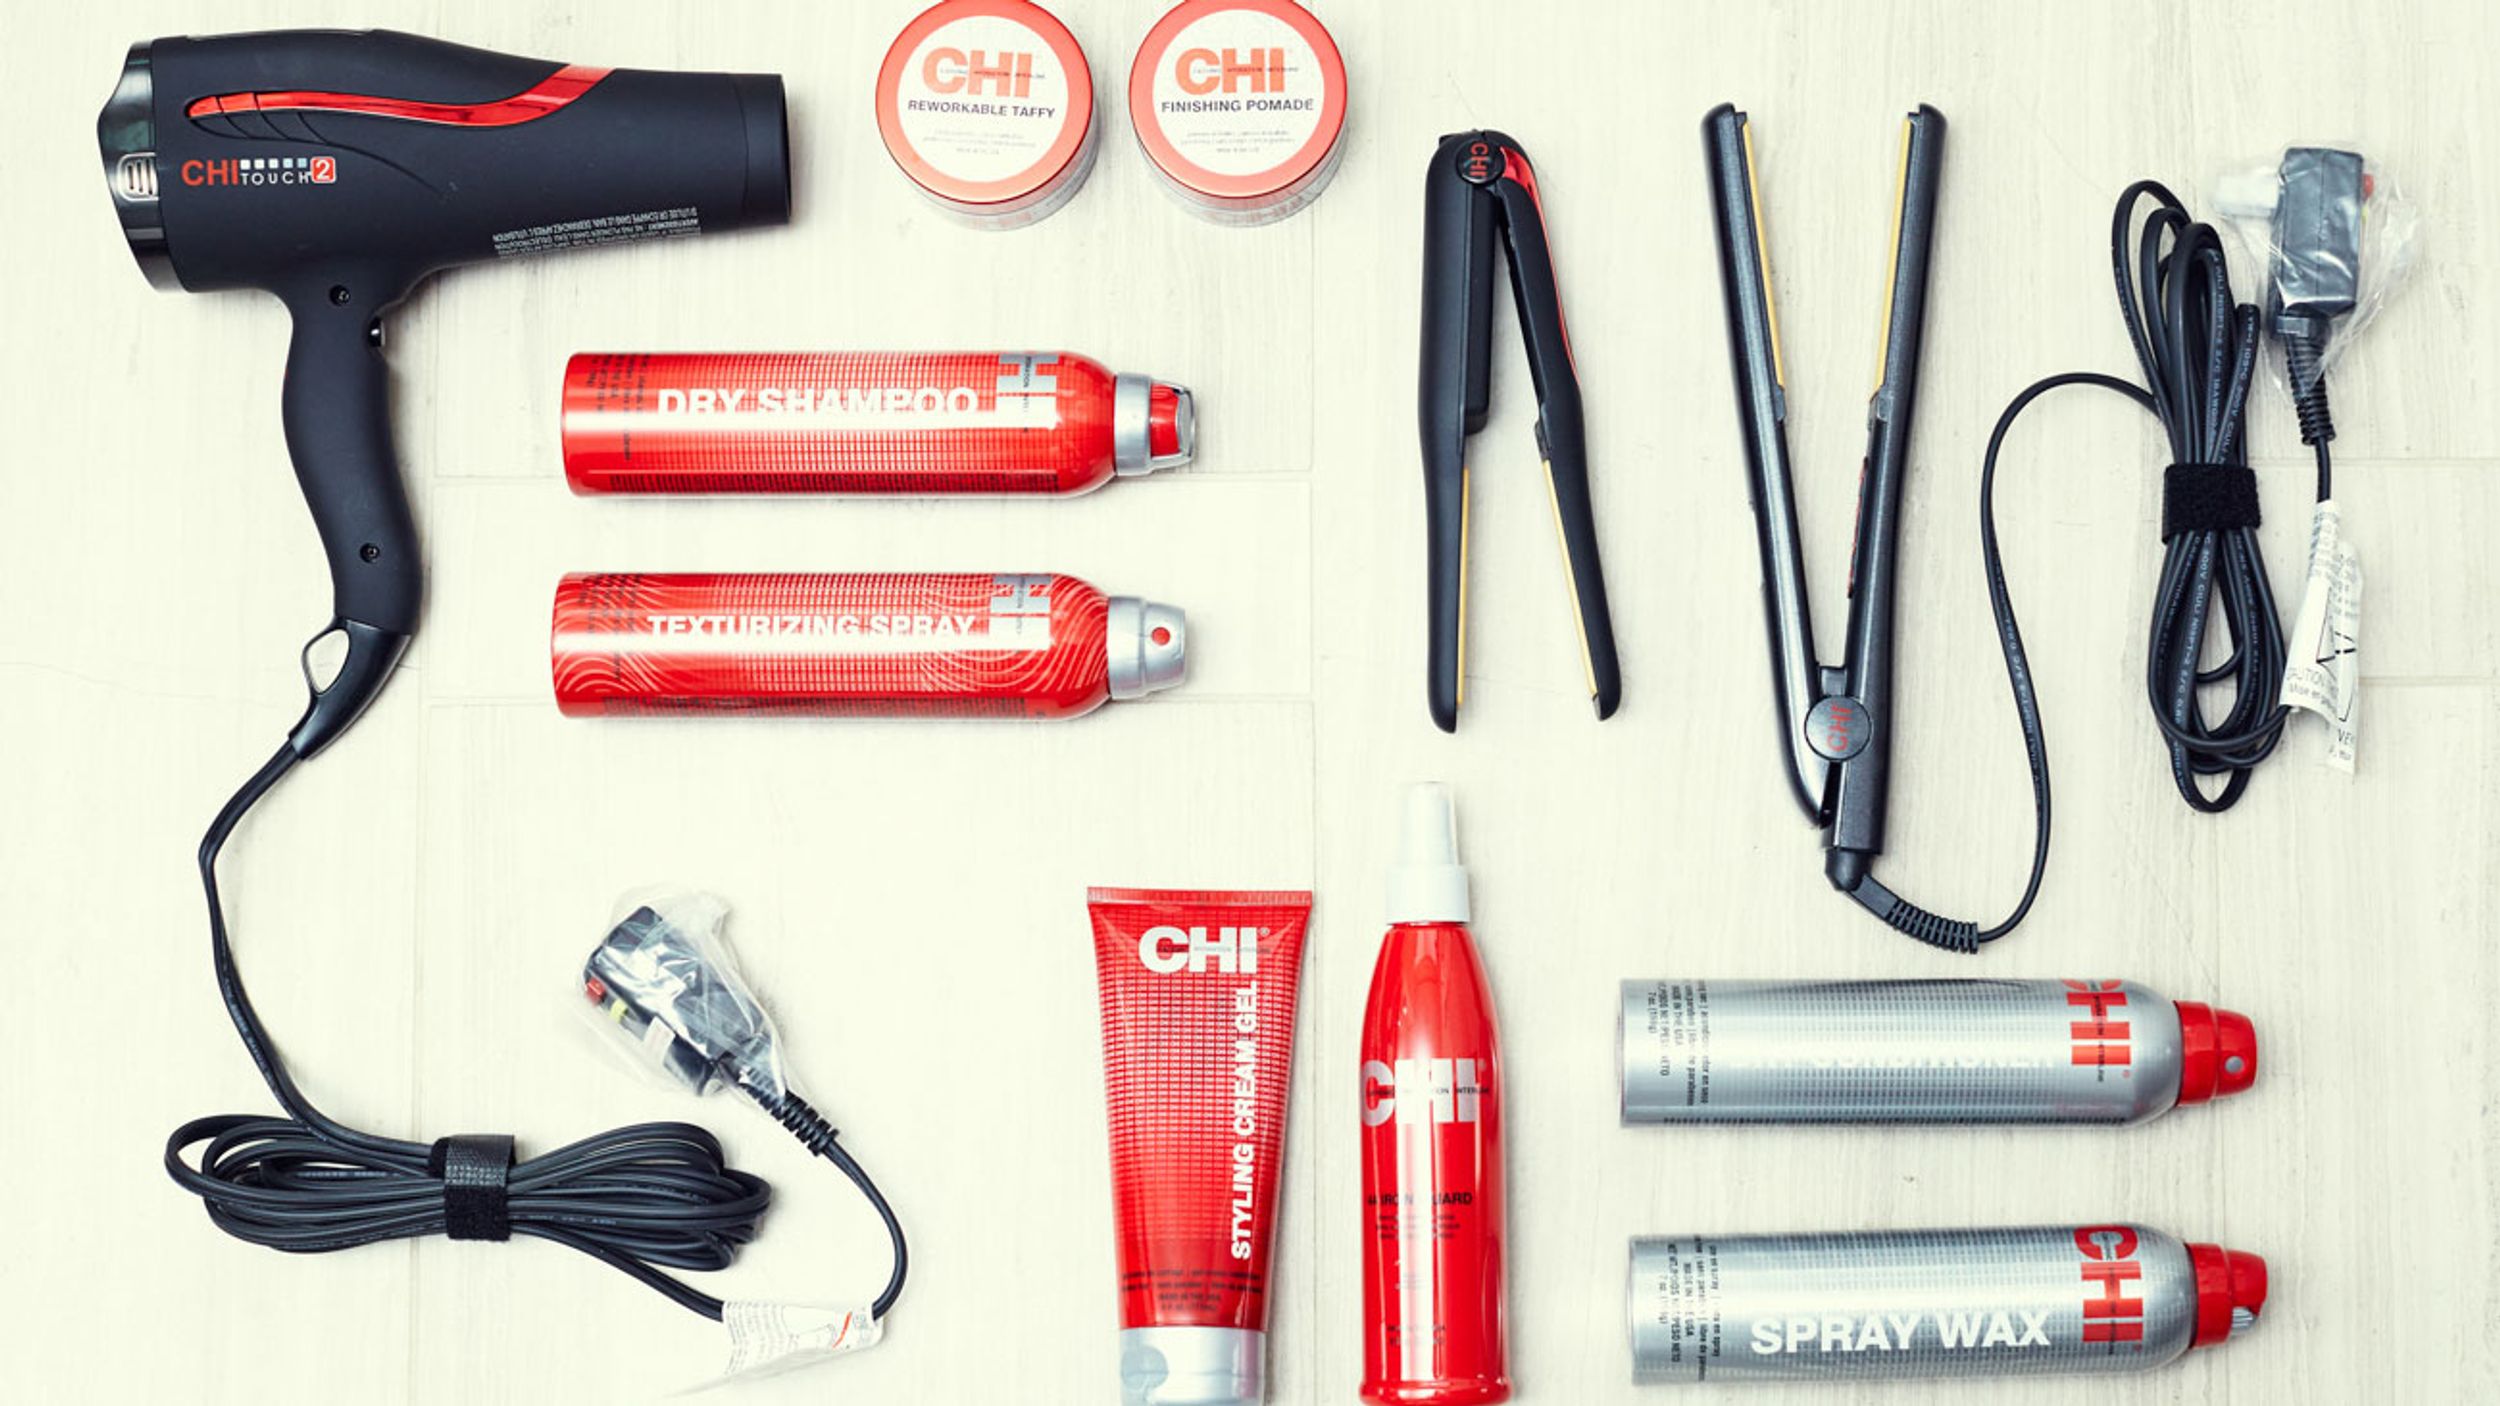 The Best Hot Tools for Every Hair Type